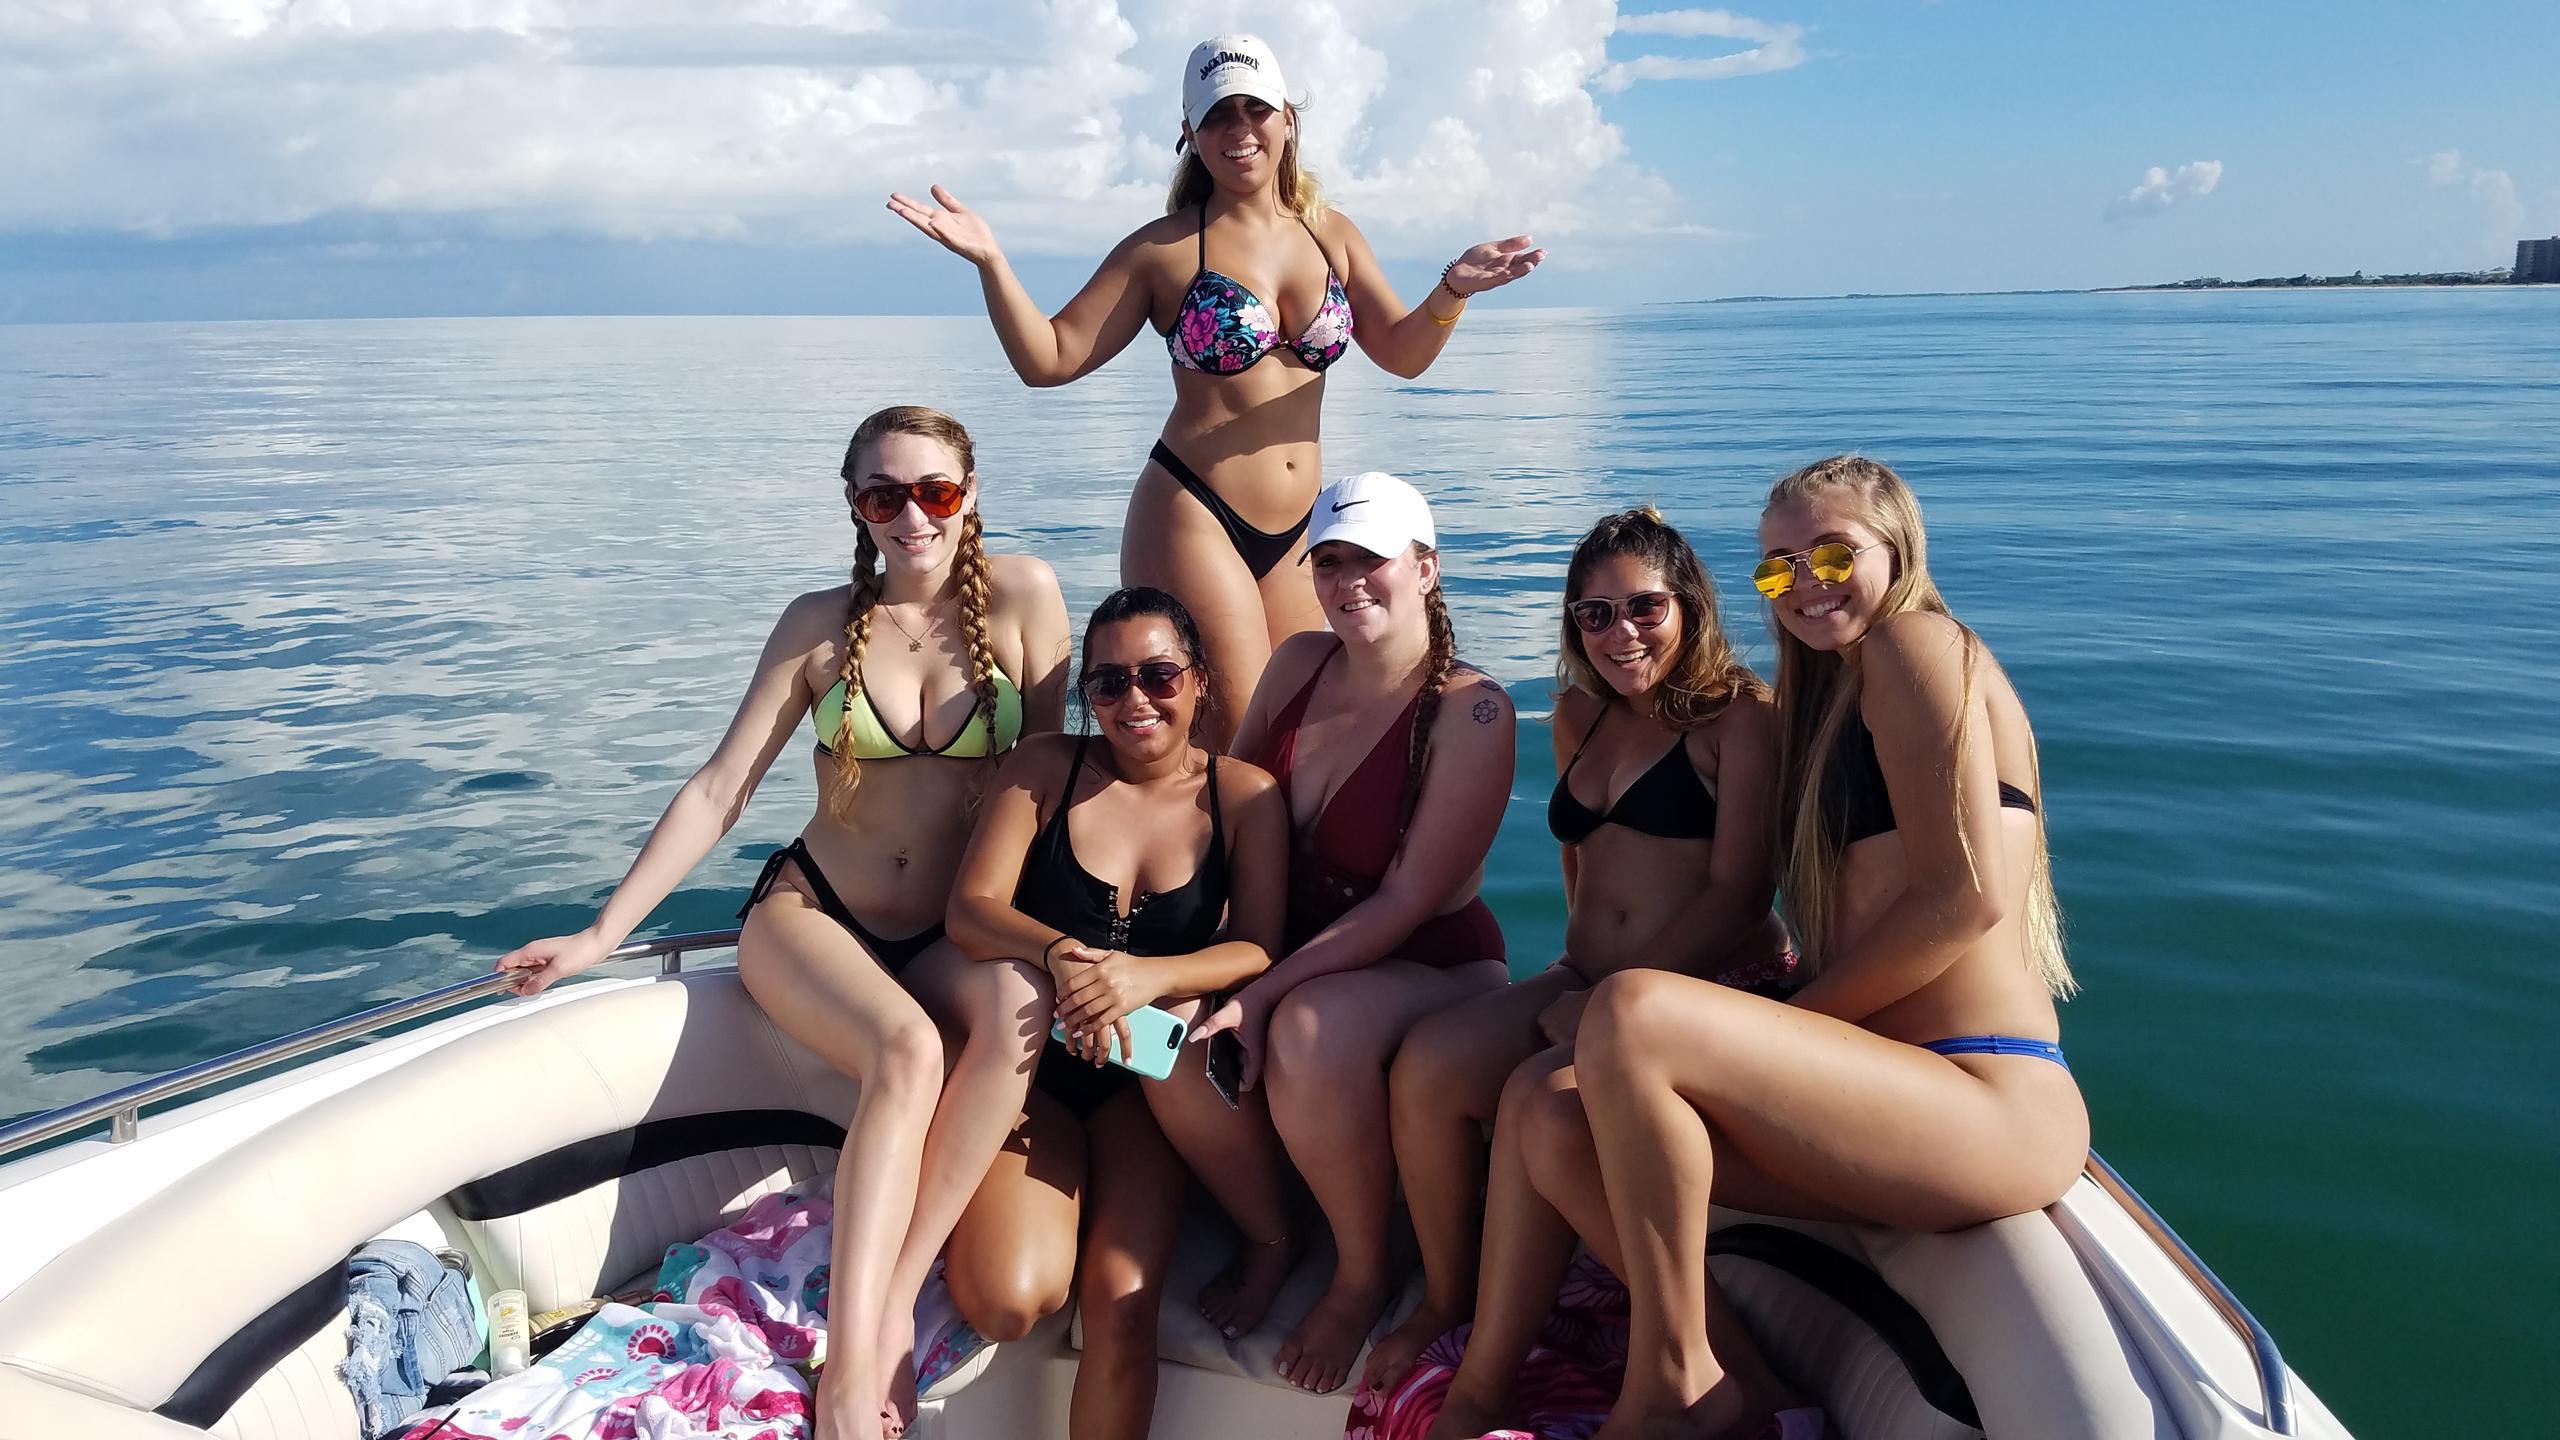 Luxury Deck Boat: Island Hopping, Dolphin Sightings, BYOB with Captain image 1